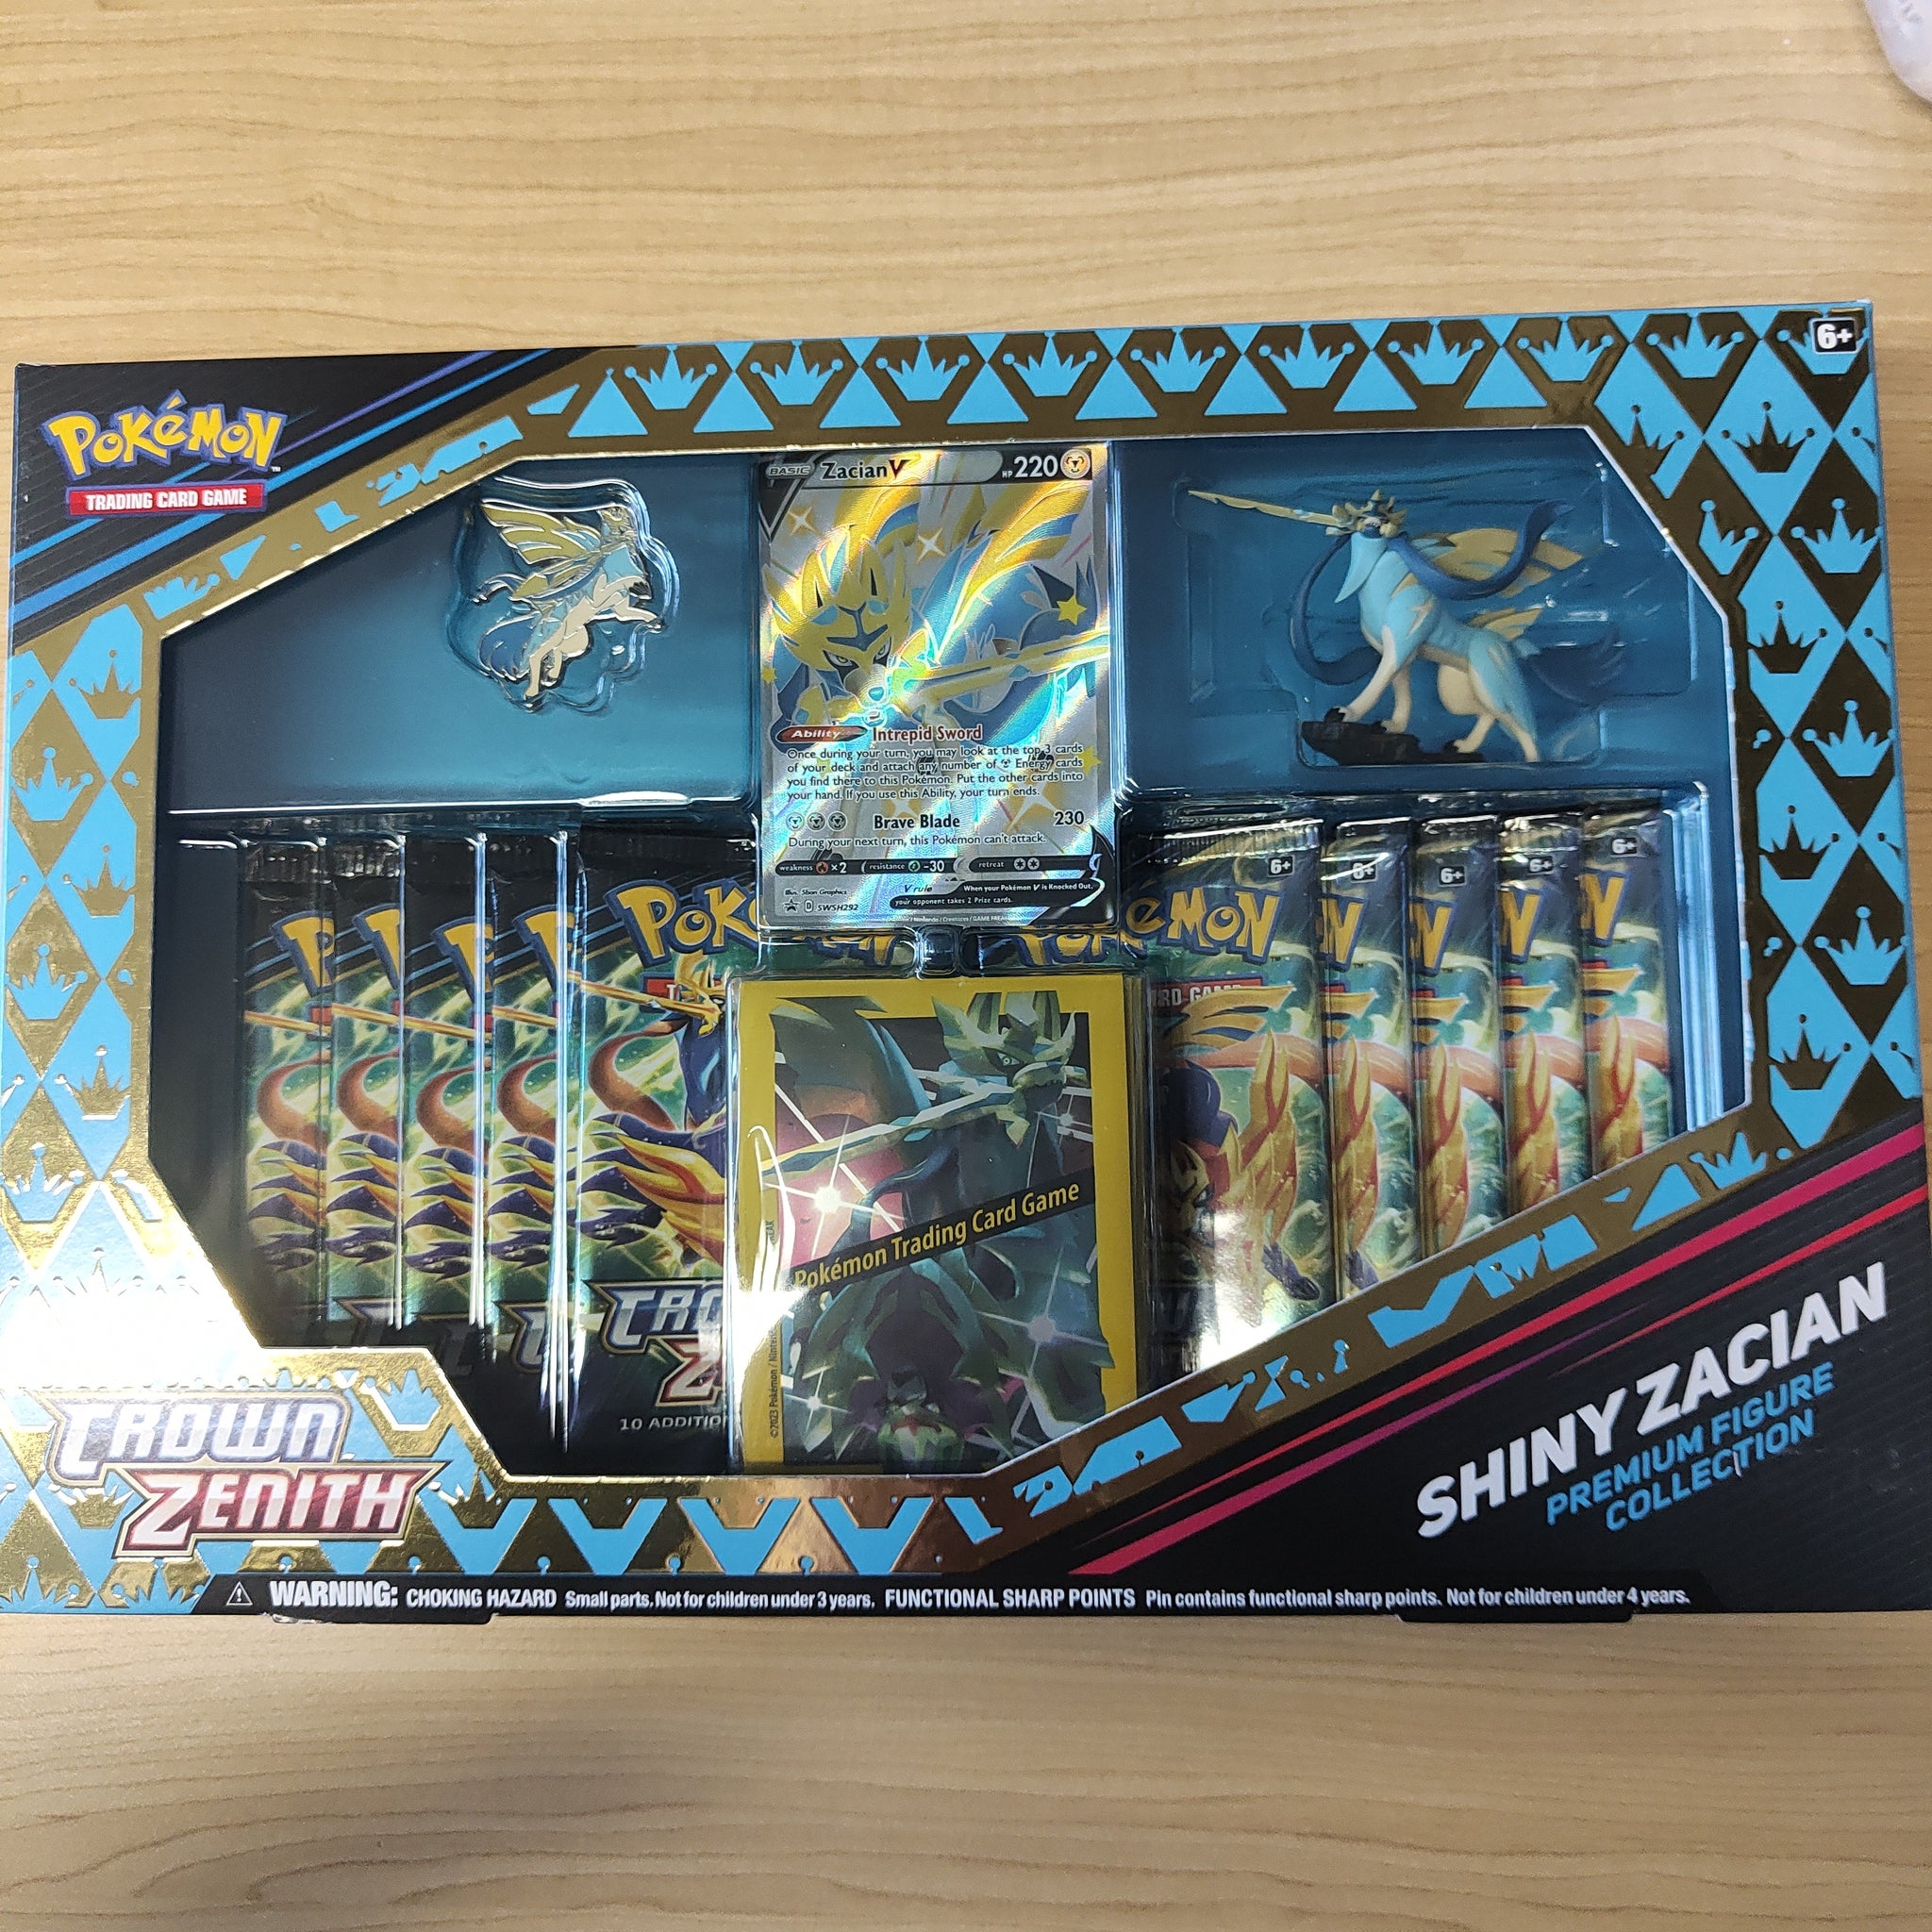 What's in the Shiny Zacian V Premium Figure Collection Box?! 